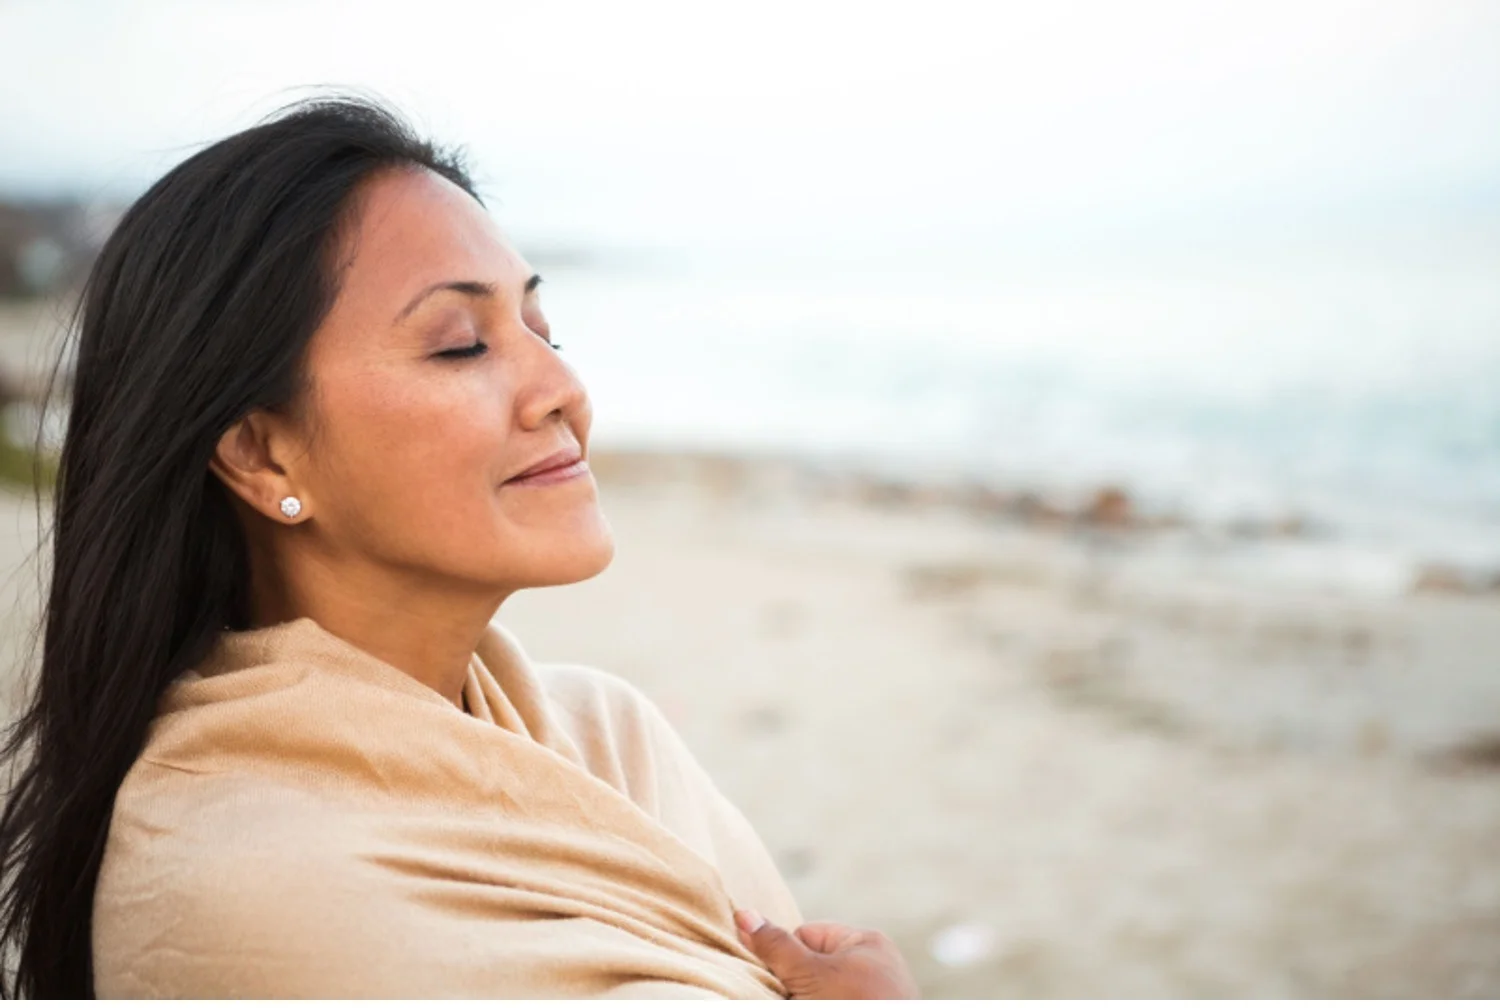 Woman on beach smiles contentedly with eyes closed